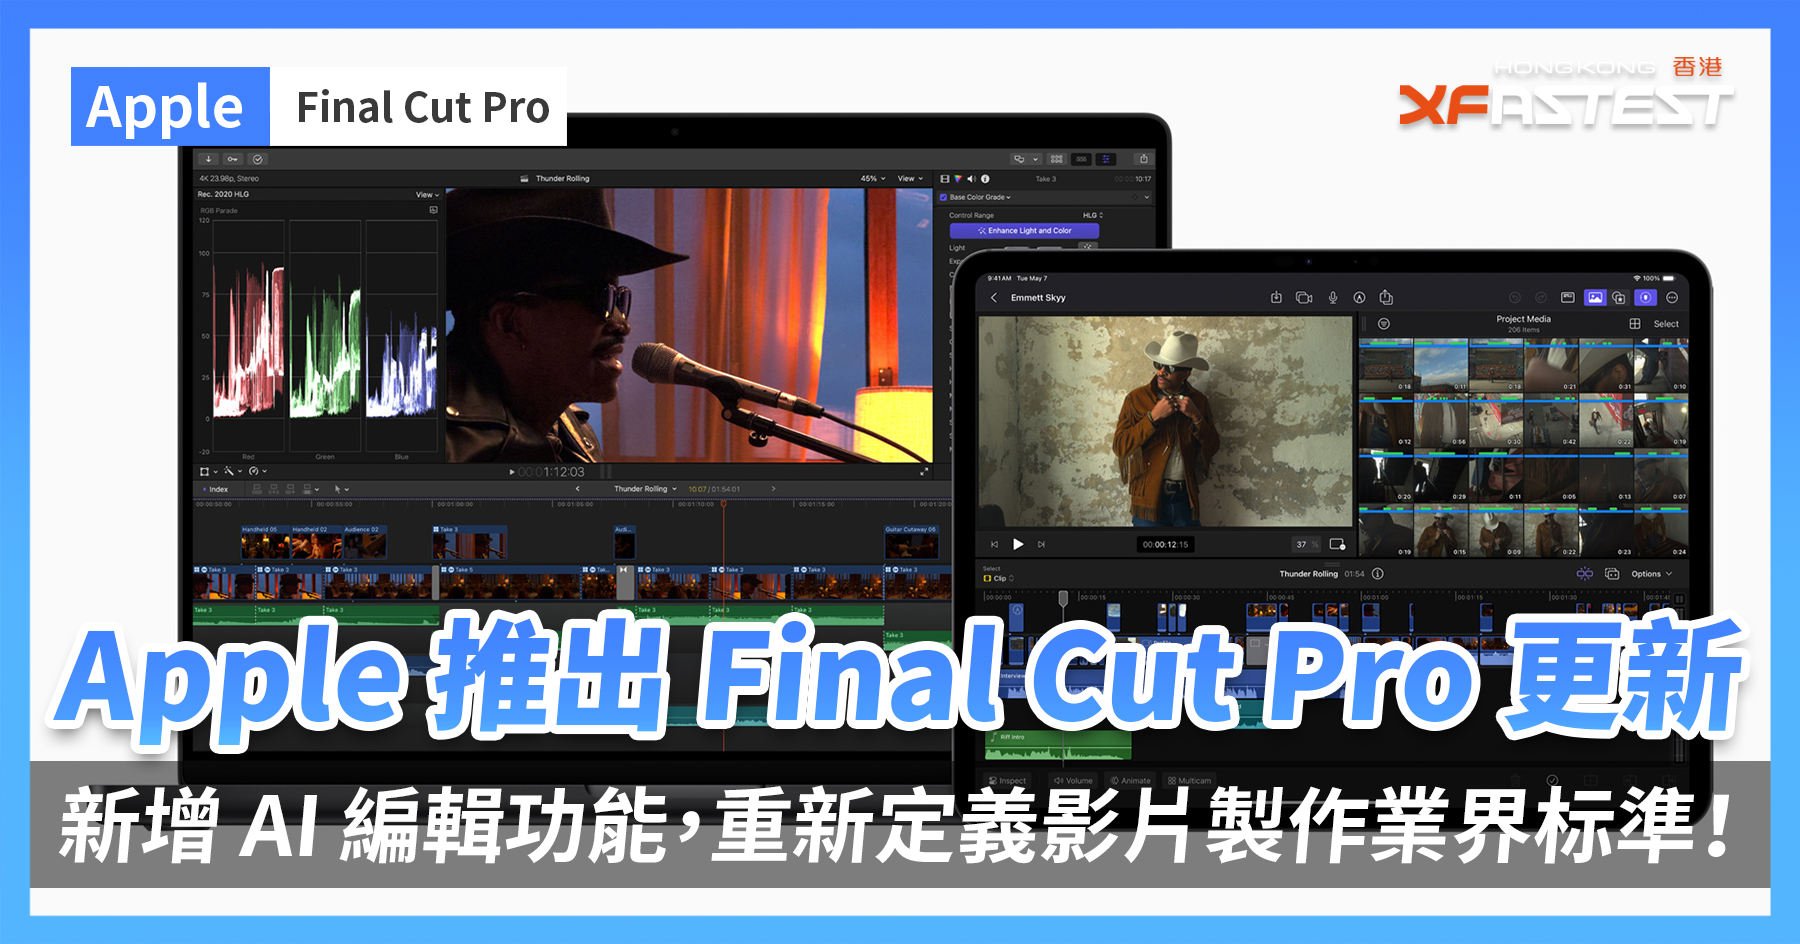 Apple launches Final Cut Pro update, adding AI editing features, redefining the industry standard for video production!